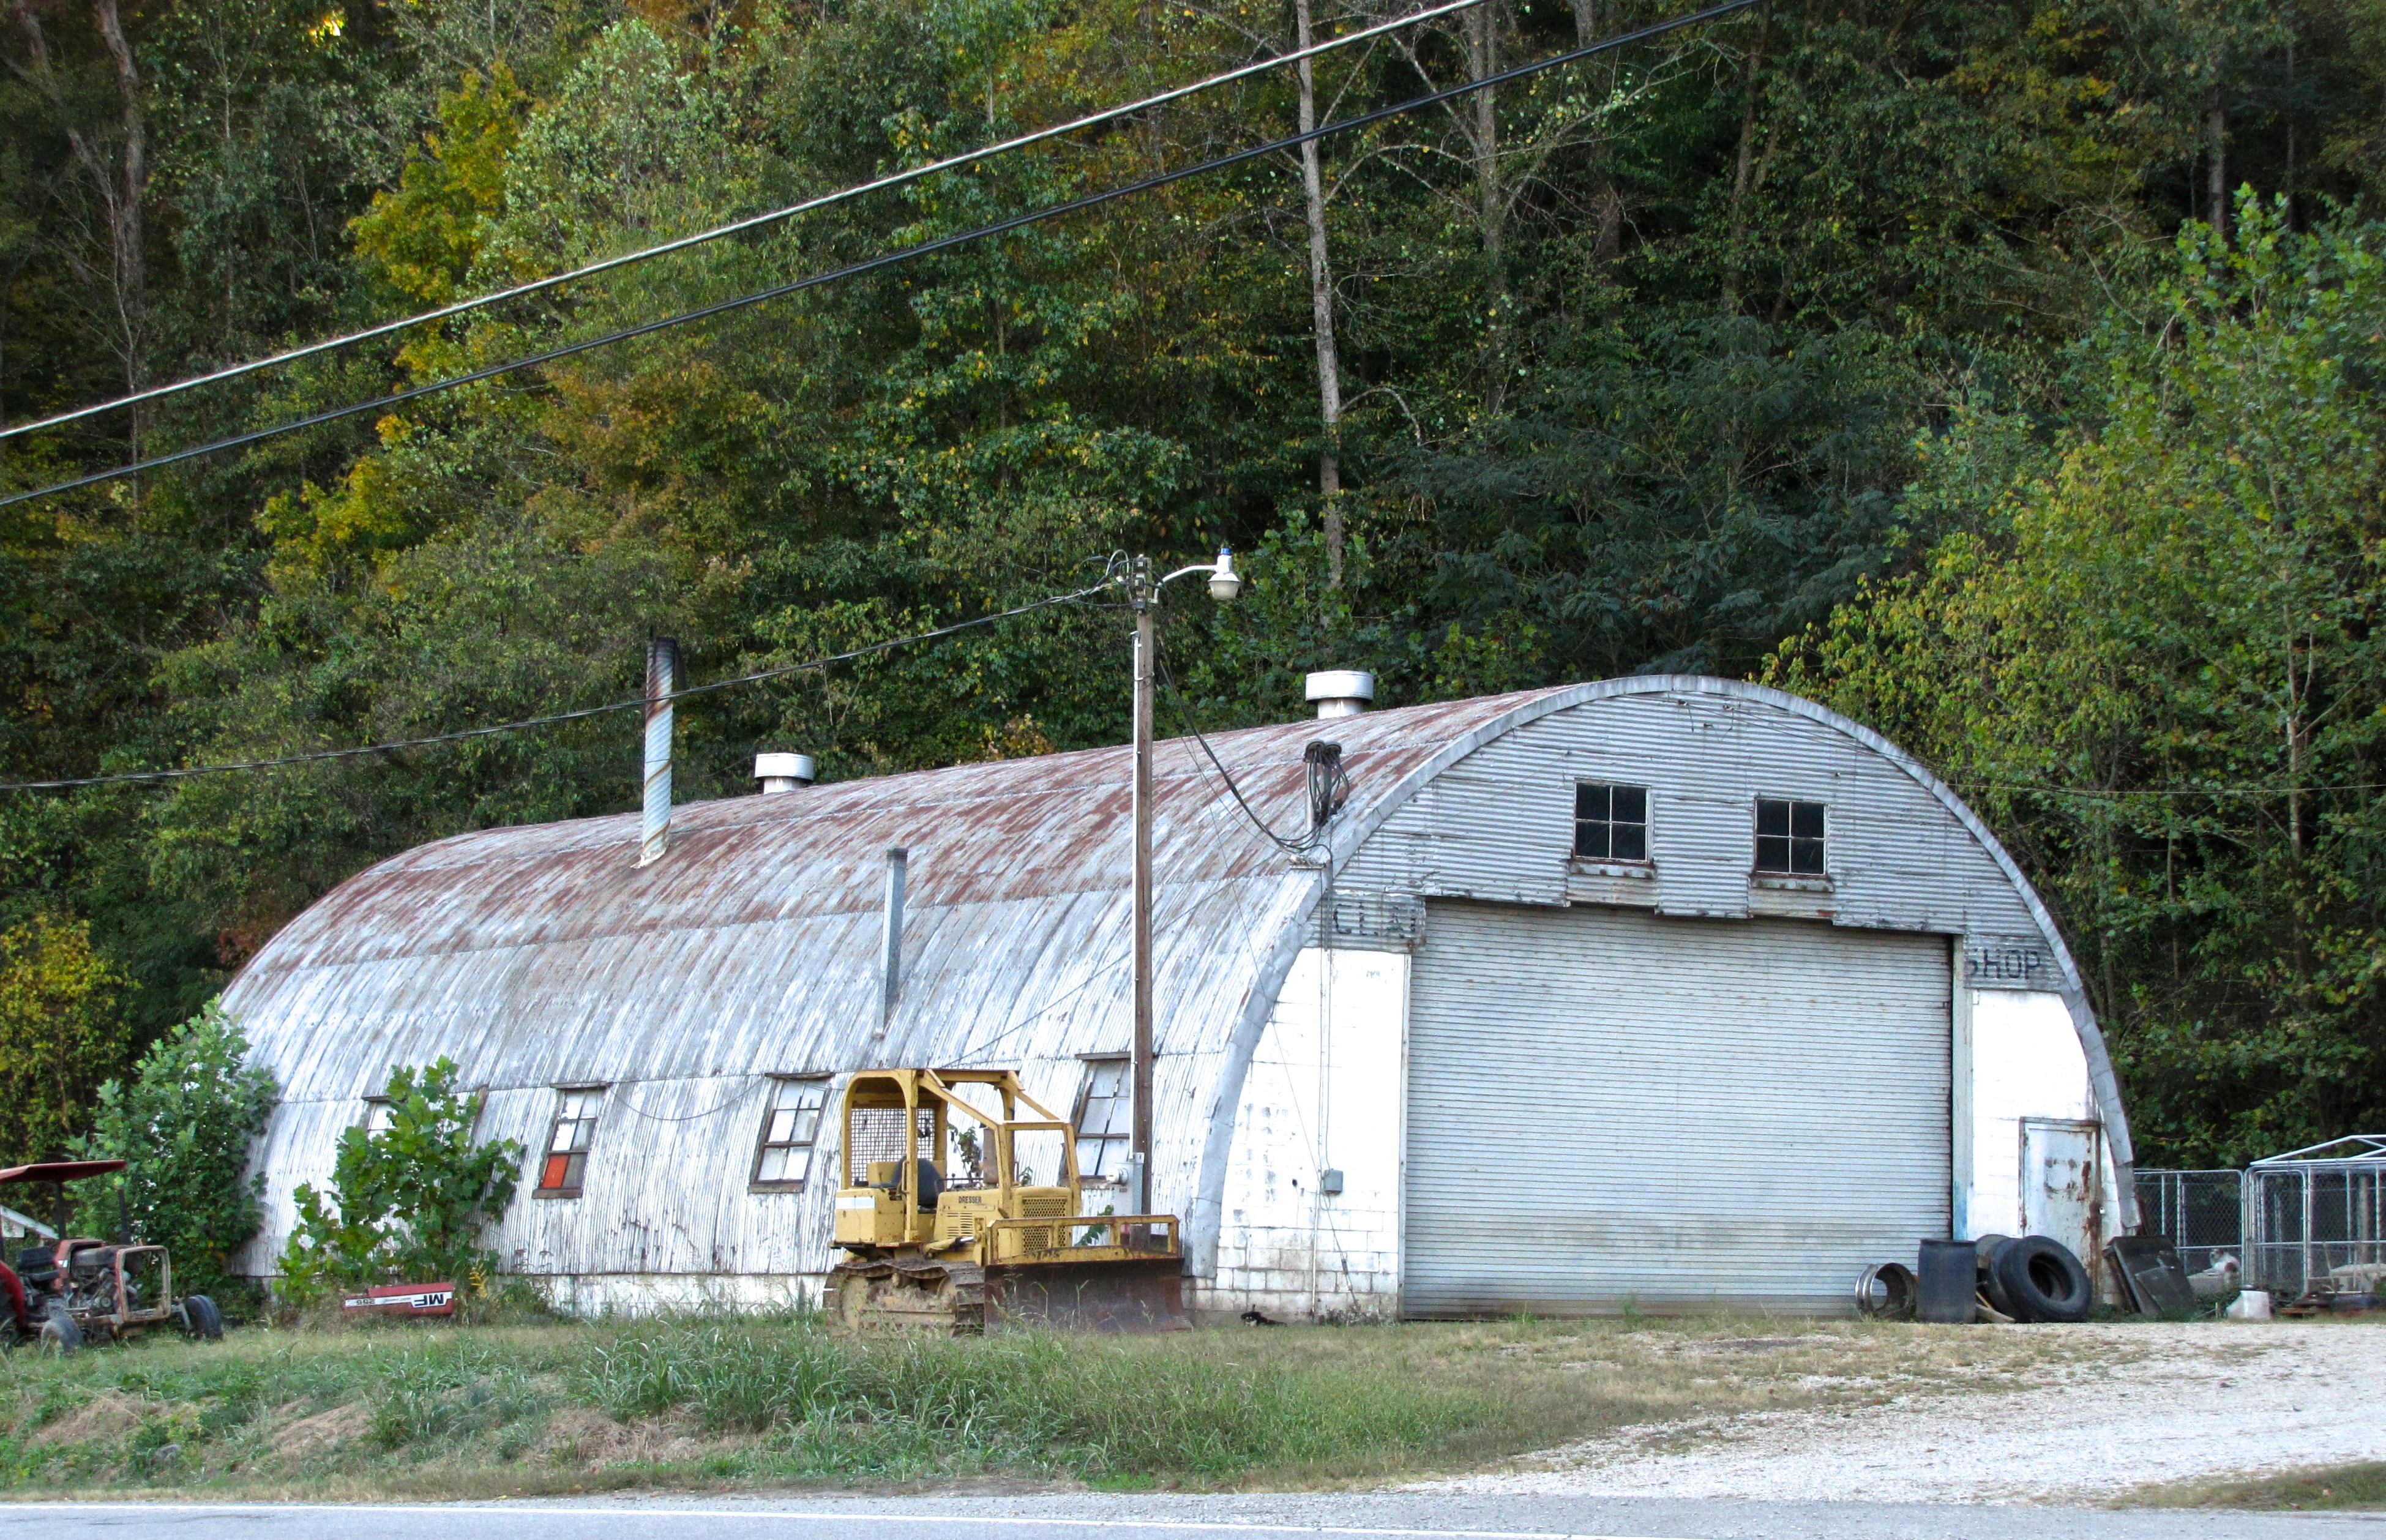 quonset hut in Dalzell, SC